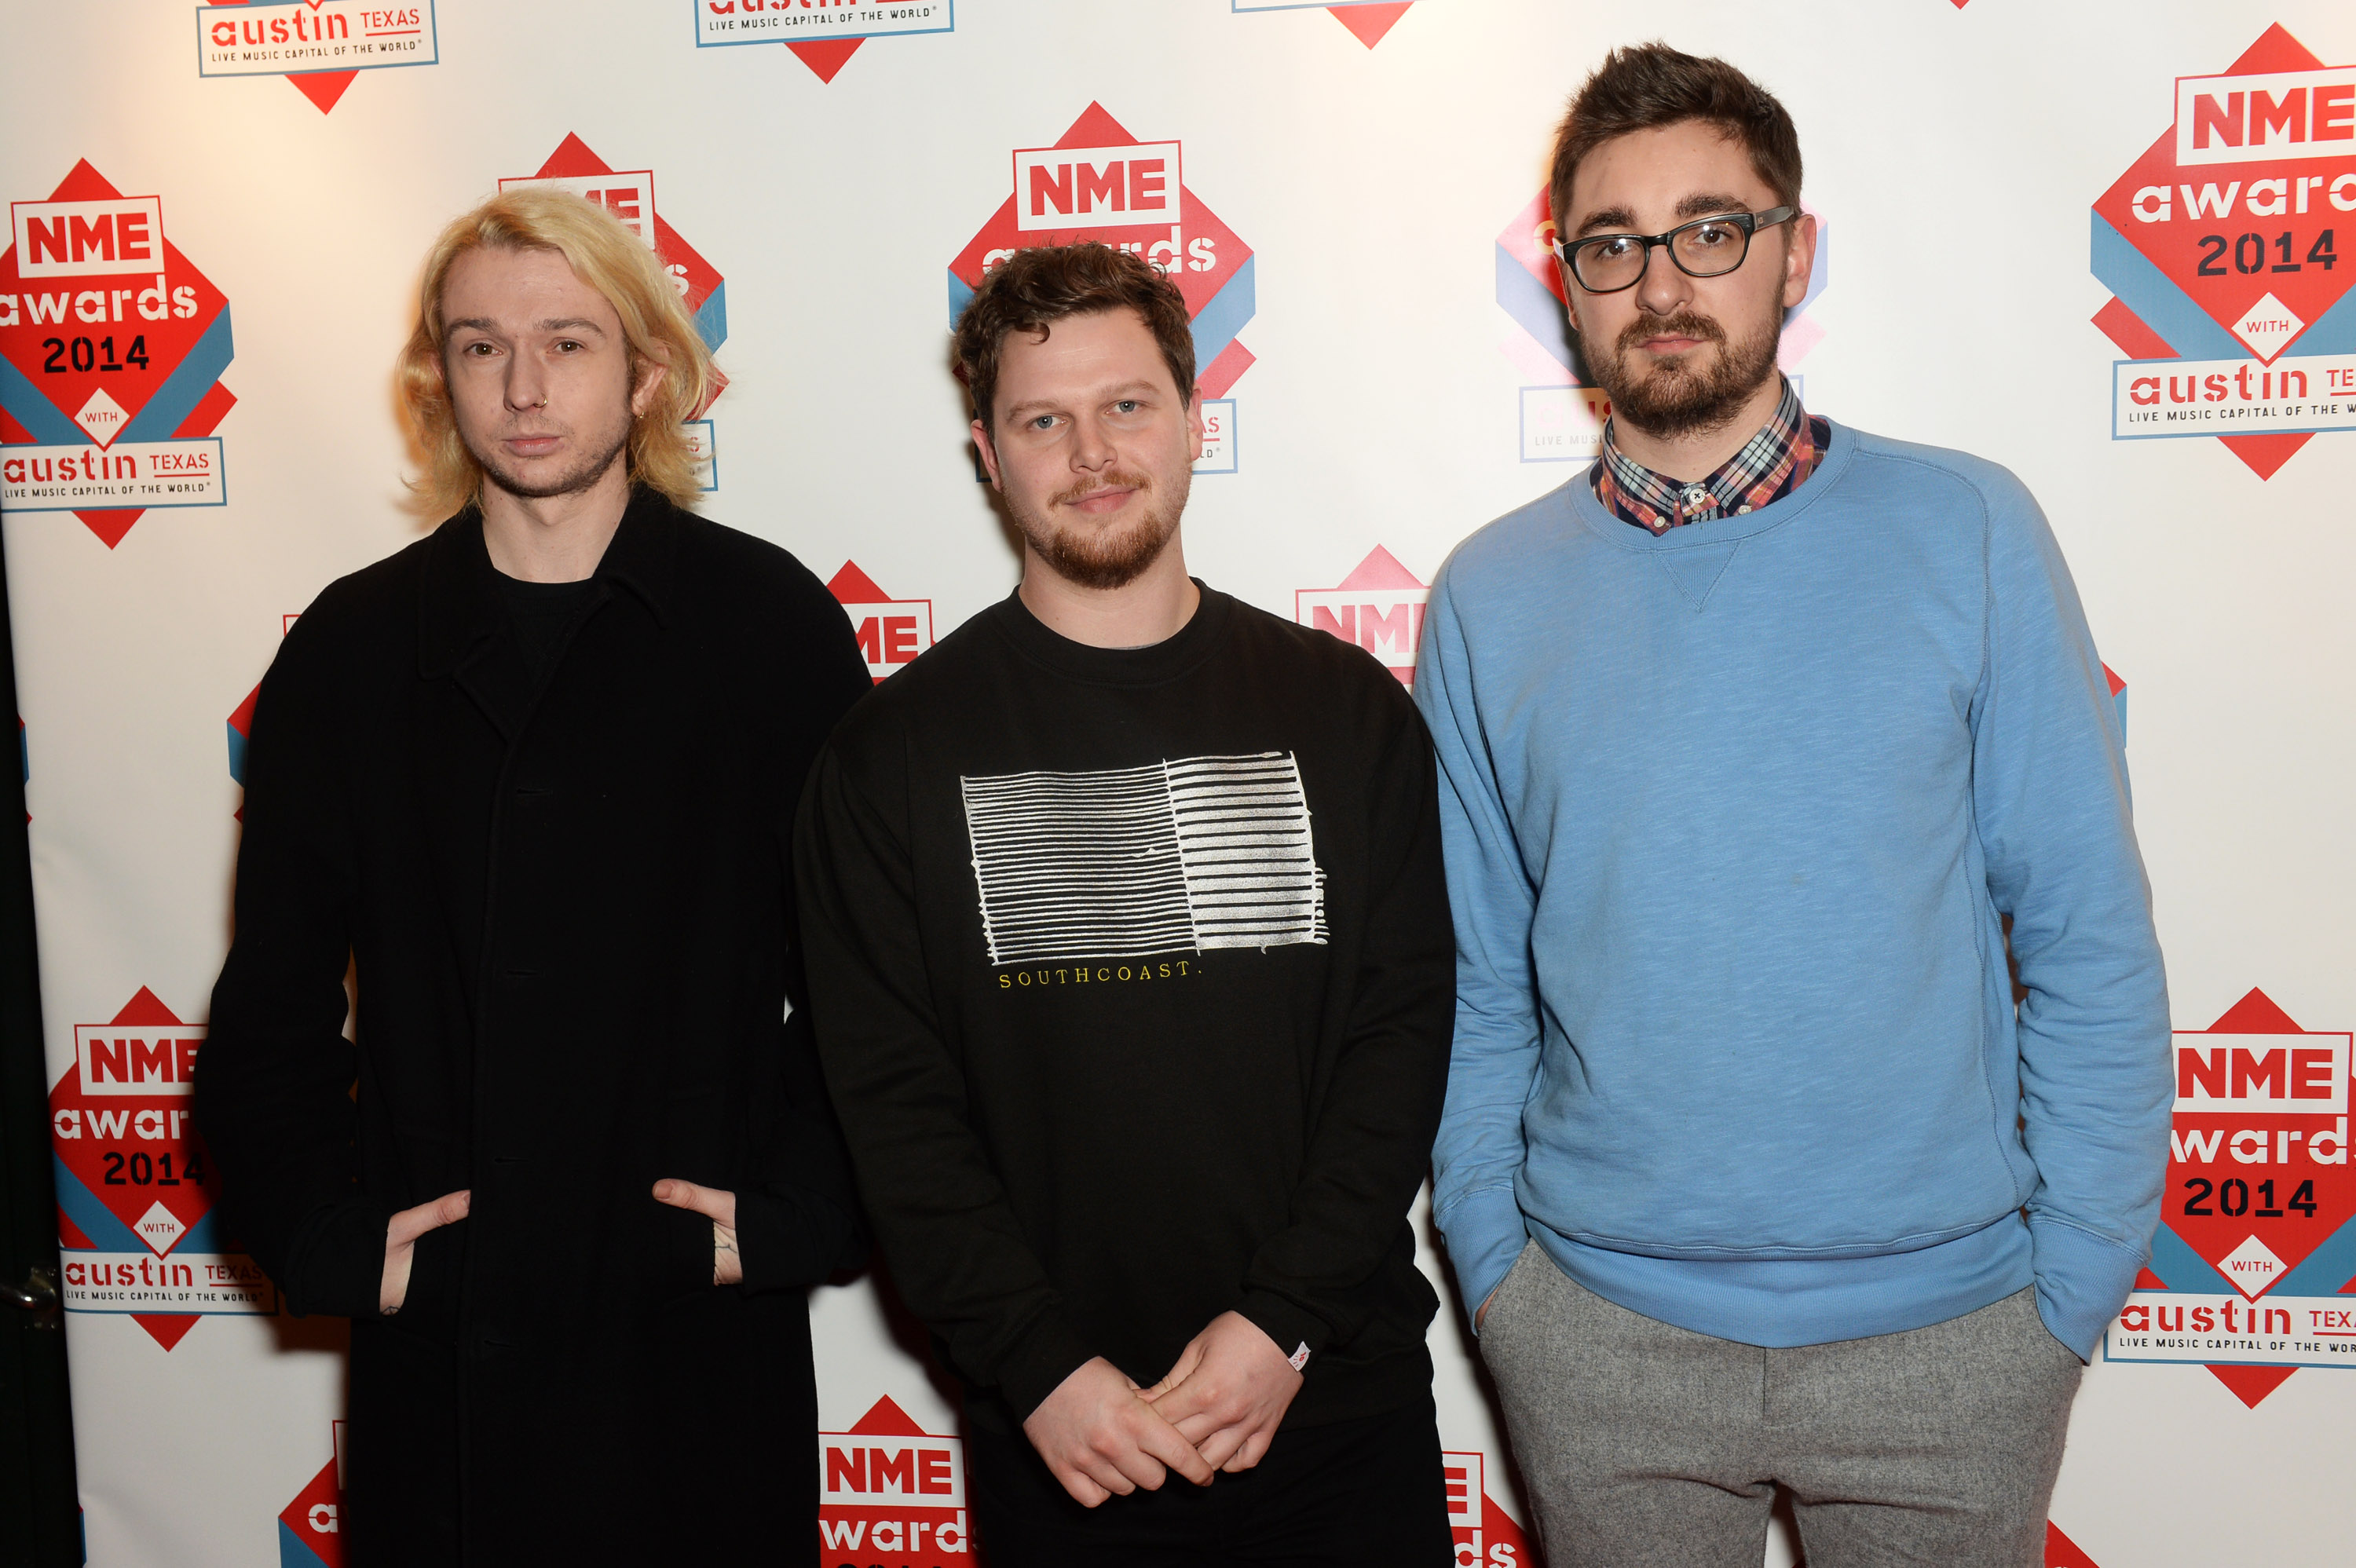 Joe Newman, Thom Green and Gus Unger-Hamilton of Alt-J attend the annual NME Awards on February 26, 2014 in London, England. (Dave J Hogan—Getty Images)